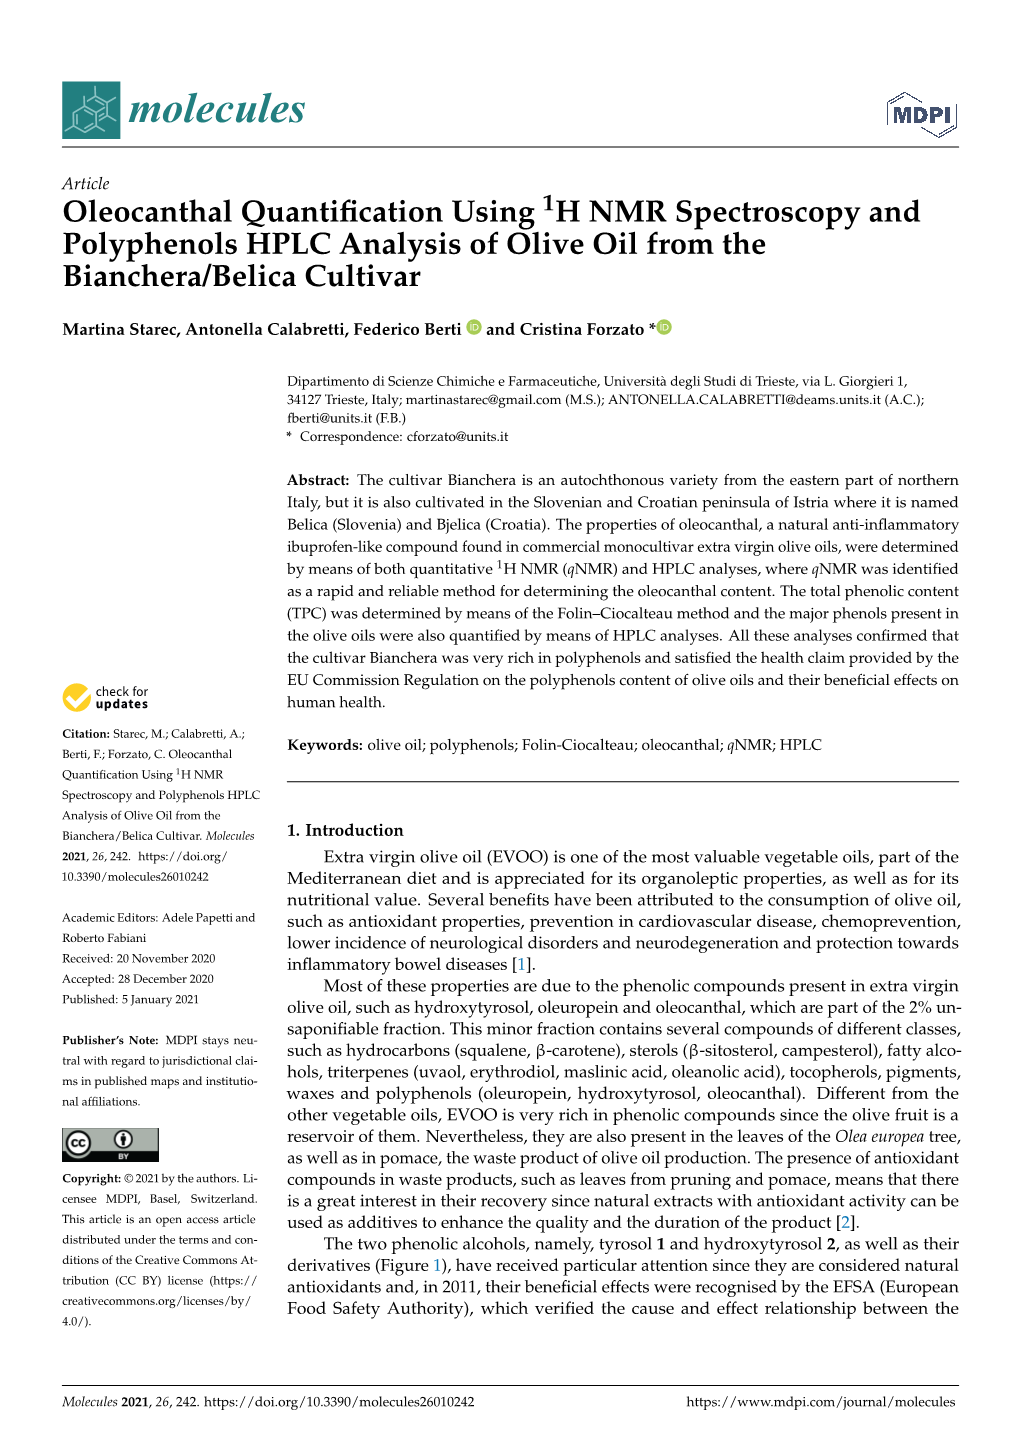 Oleocanthal Quantification Using 1H NMR Spectroscopy And